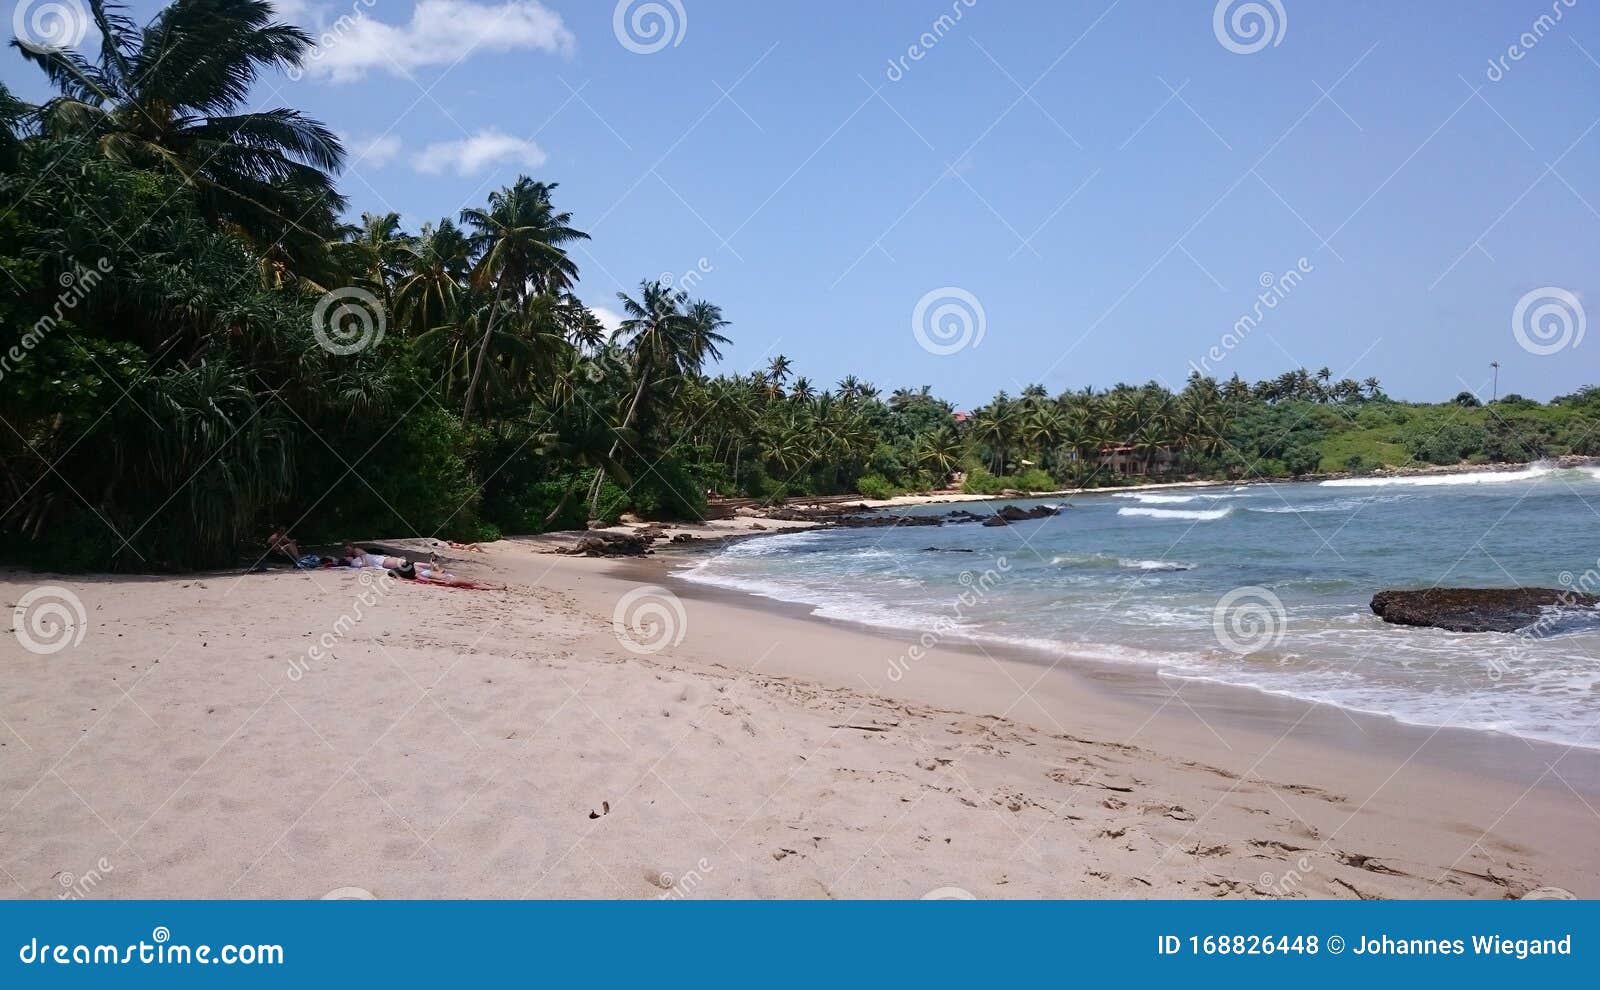 Tropical Dream Beach Bay In Dikwella Stock Photo Image Of Most Lanka 168826448,10 Most Beautiful Beaches In The World